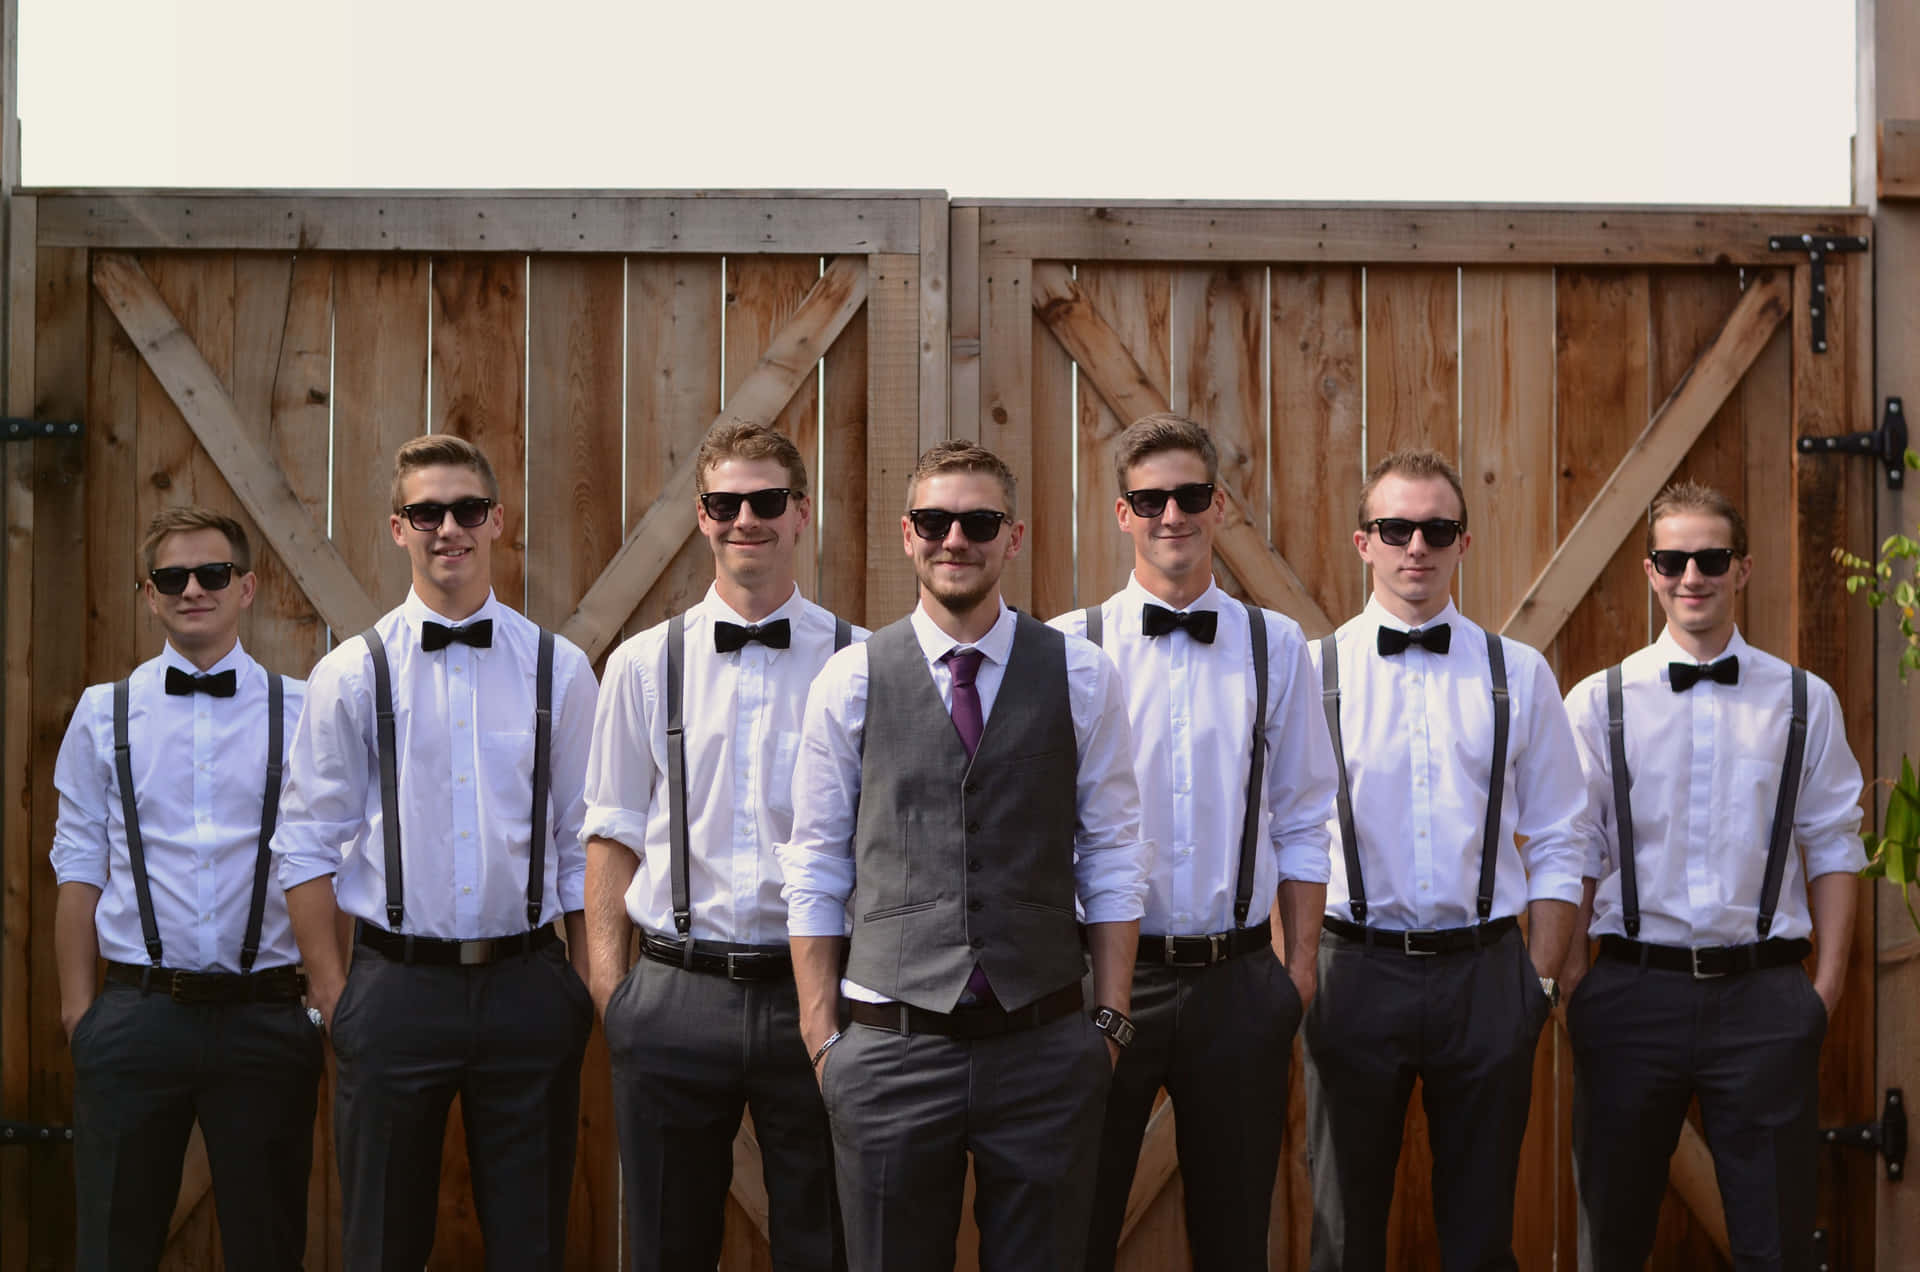 A groom surrounded by his groomsmen on the happiest day of his life